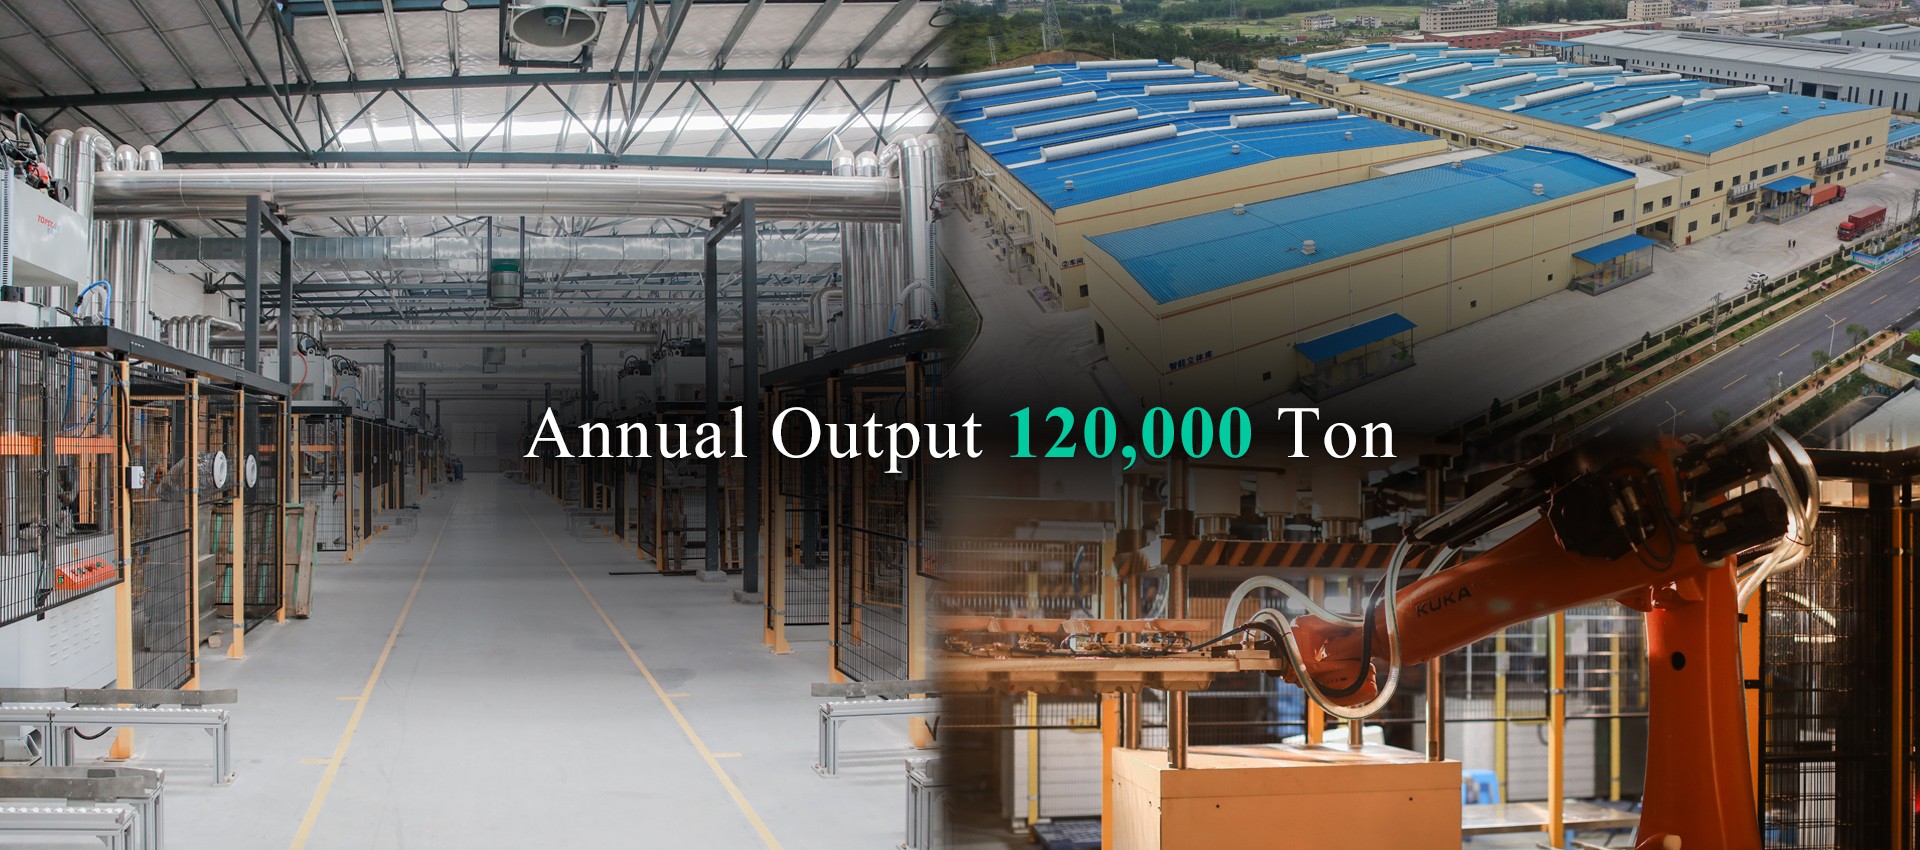 Pulp moulded Factory internal and external display. The annual output is over 120,000 ton.